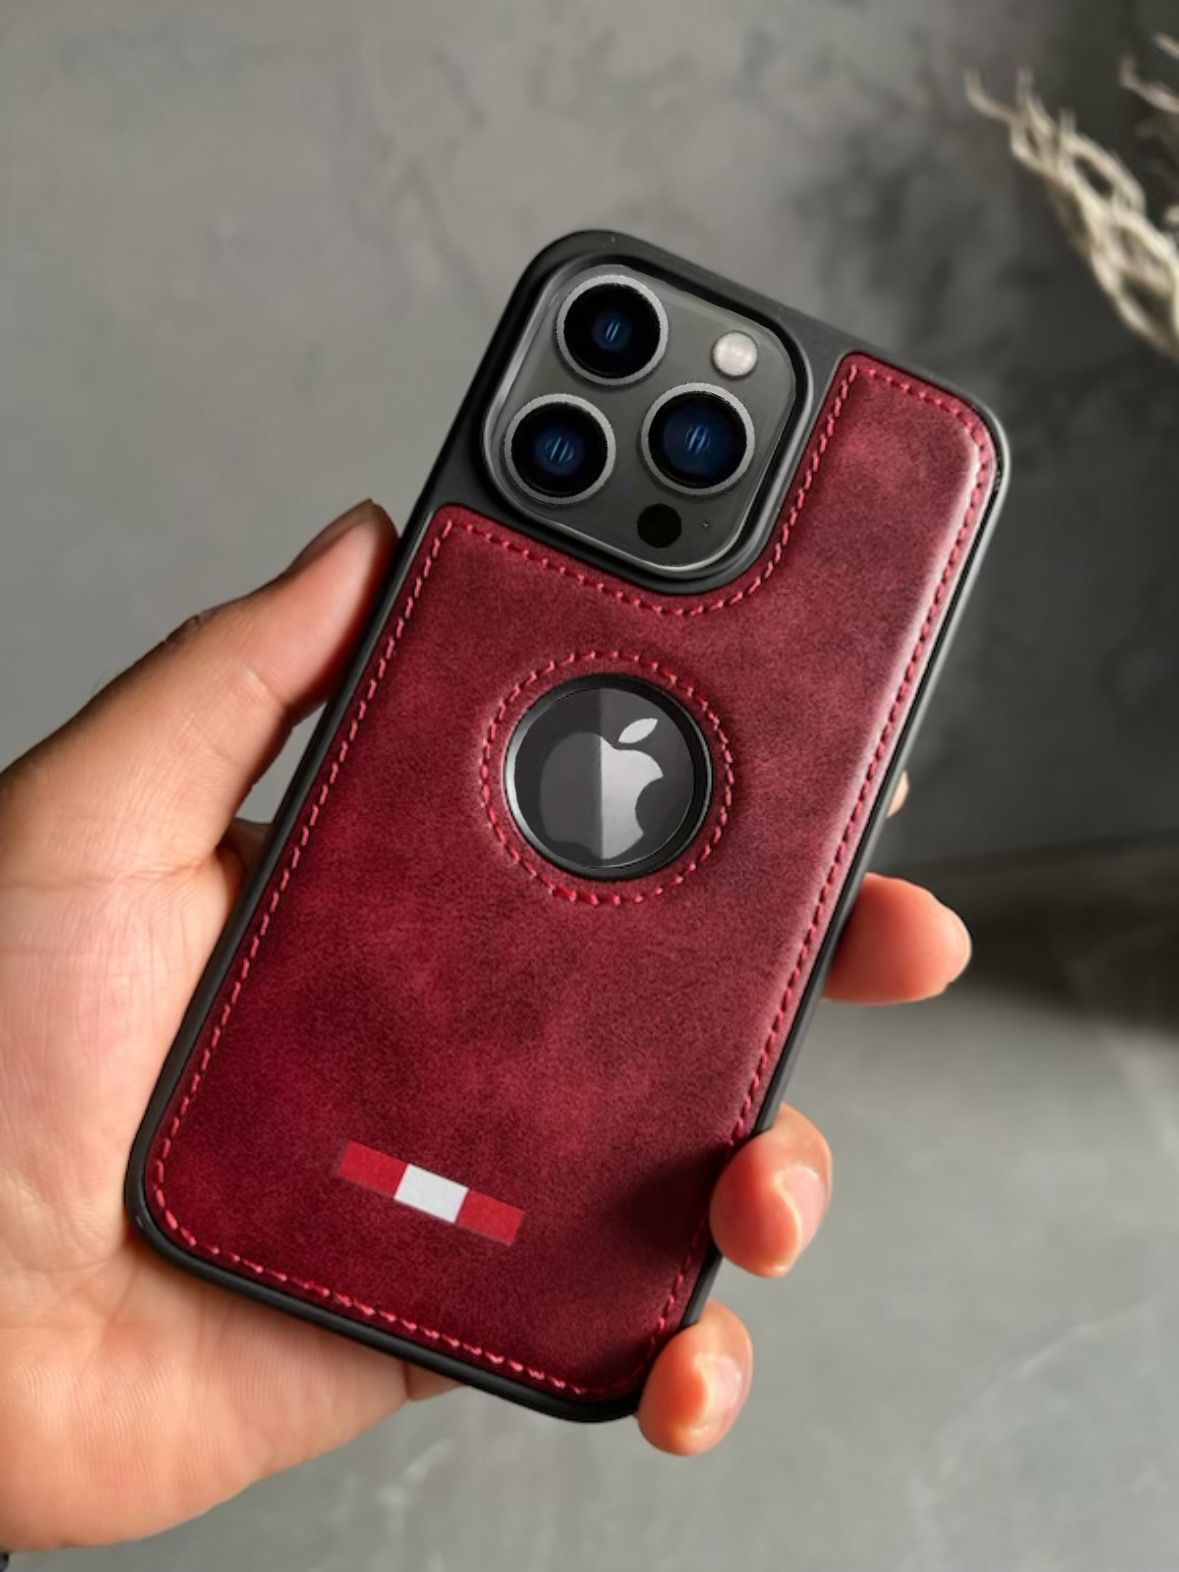 https://www.casekidukaan.com/image/cache/catalog/cases/leather/Roundcut/red%20leather%20case%20for%20iphone-1179x1572.jpeg